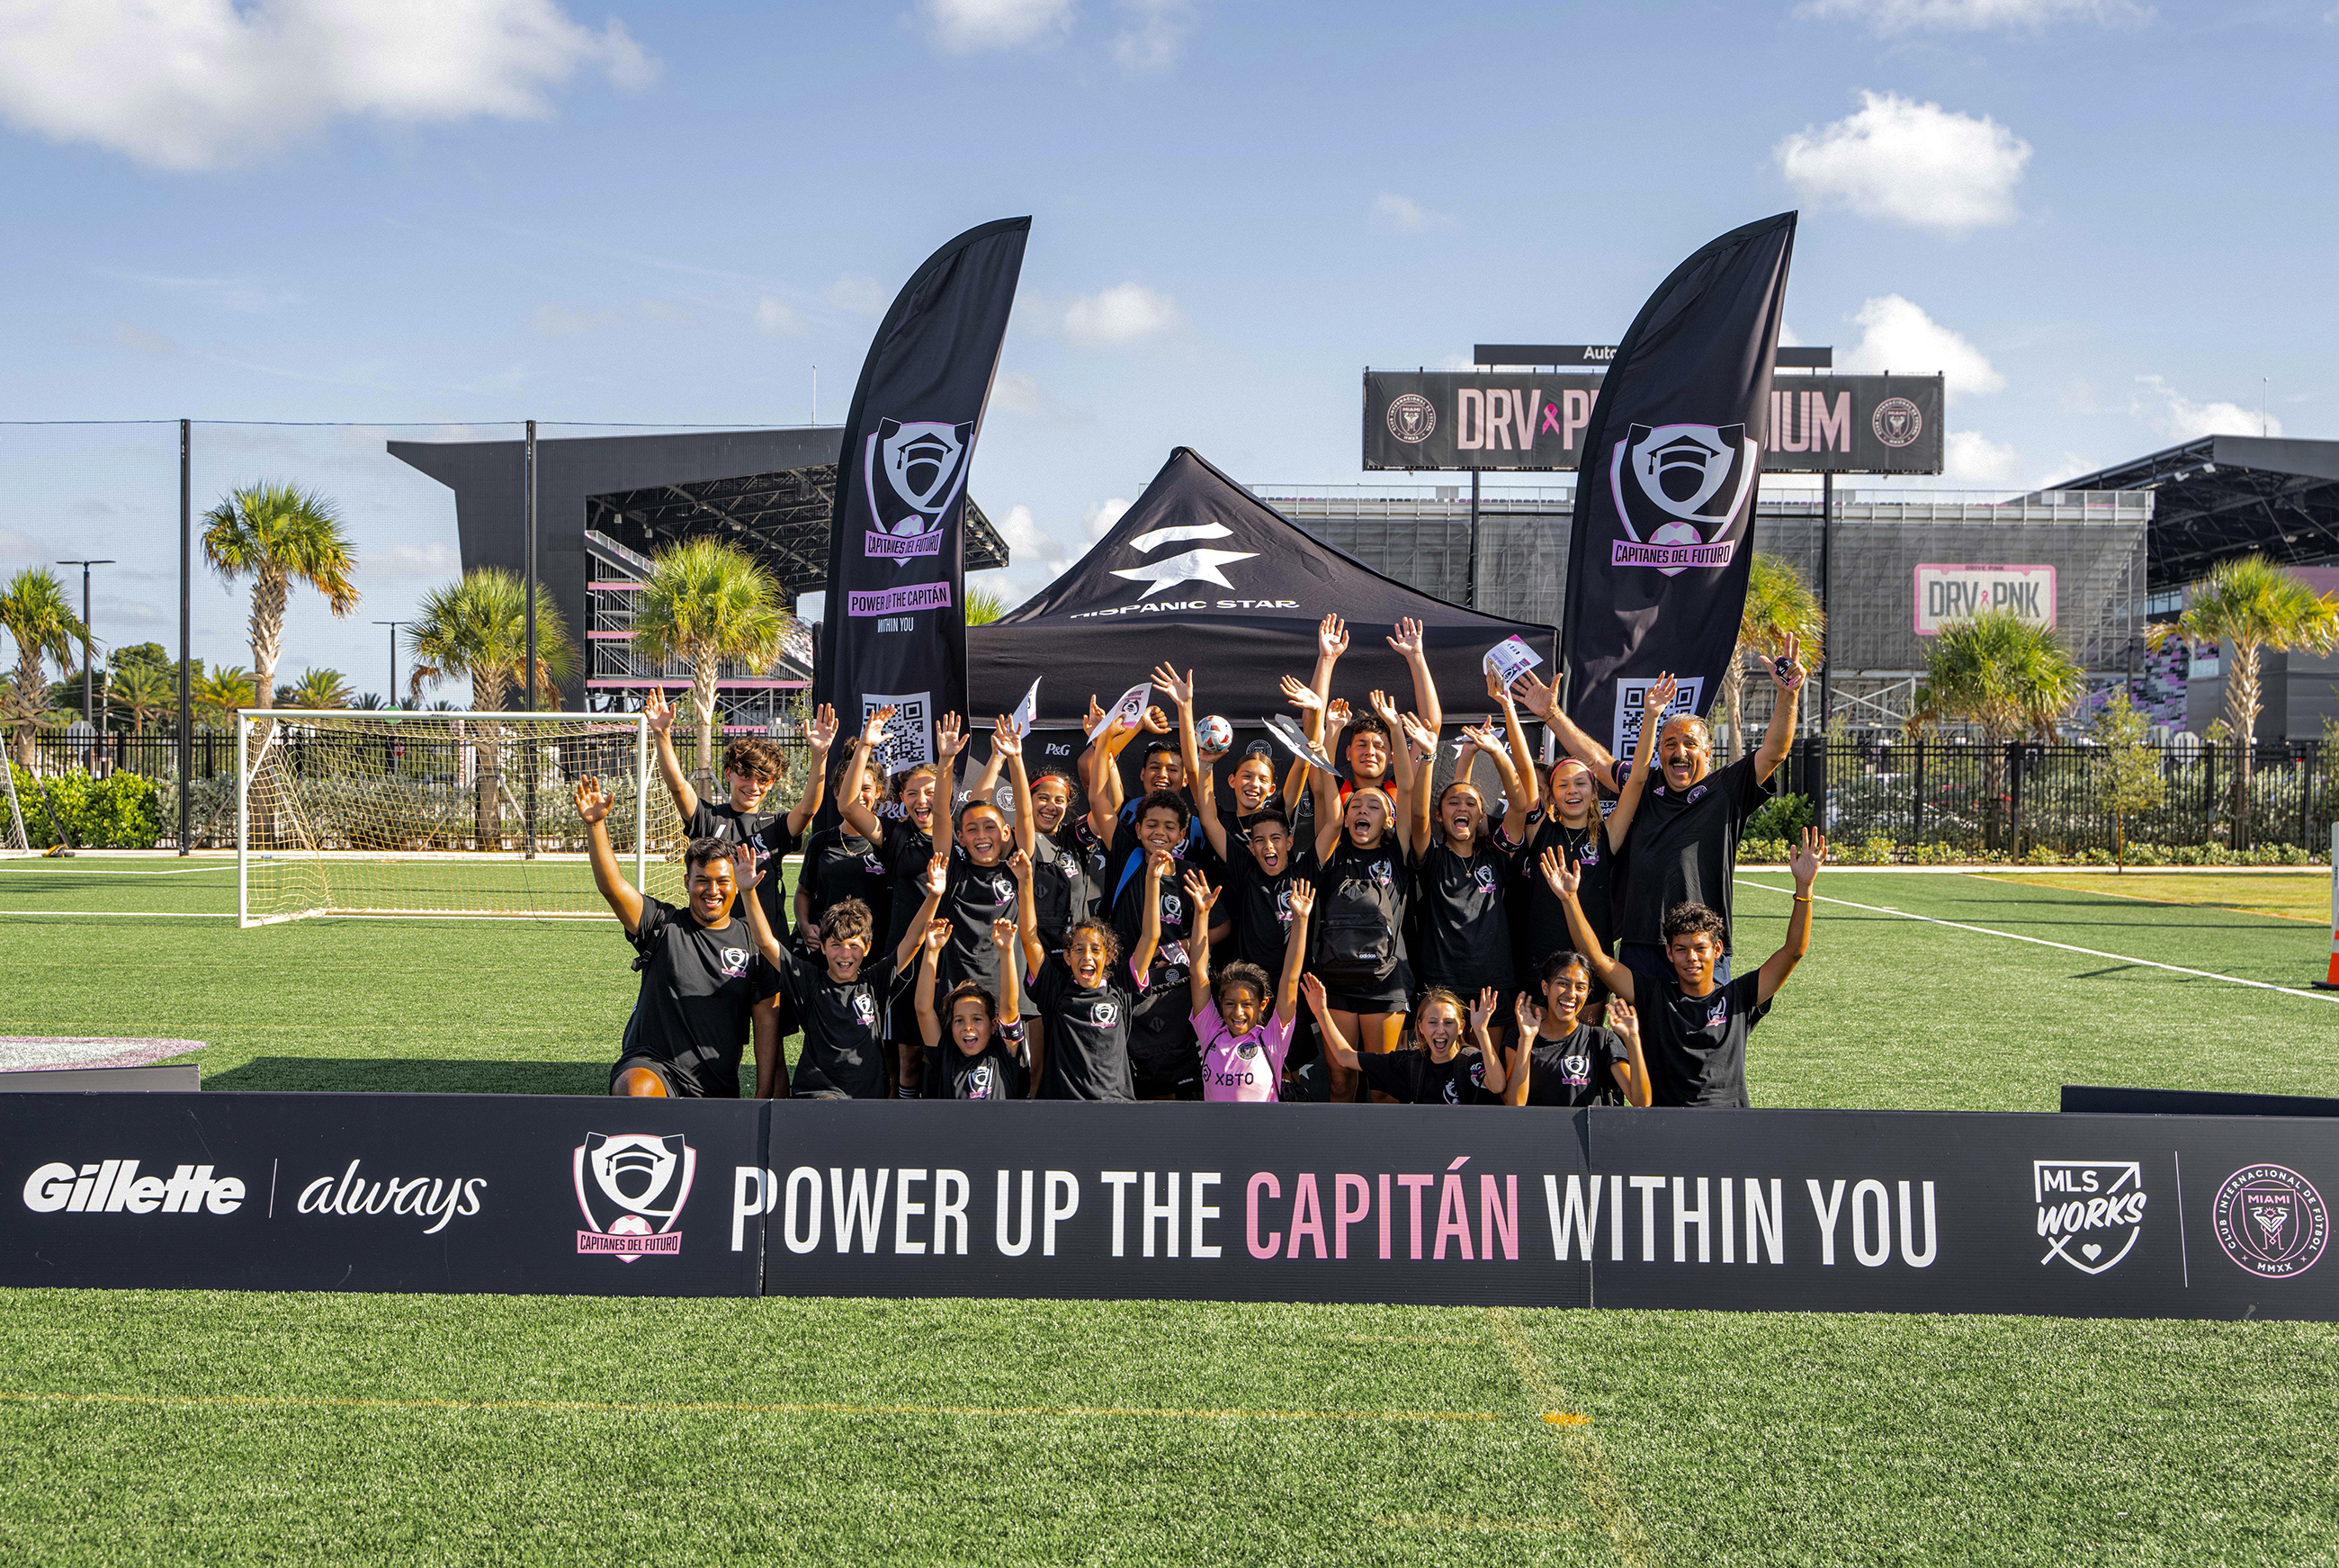 Fernando Fiore celebrates with a group of Hispanic students during a Capitanes del Futuro event held at the Inter Miami CF training center.